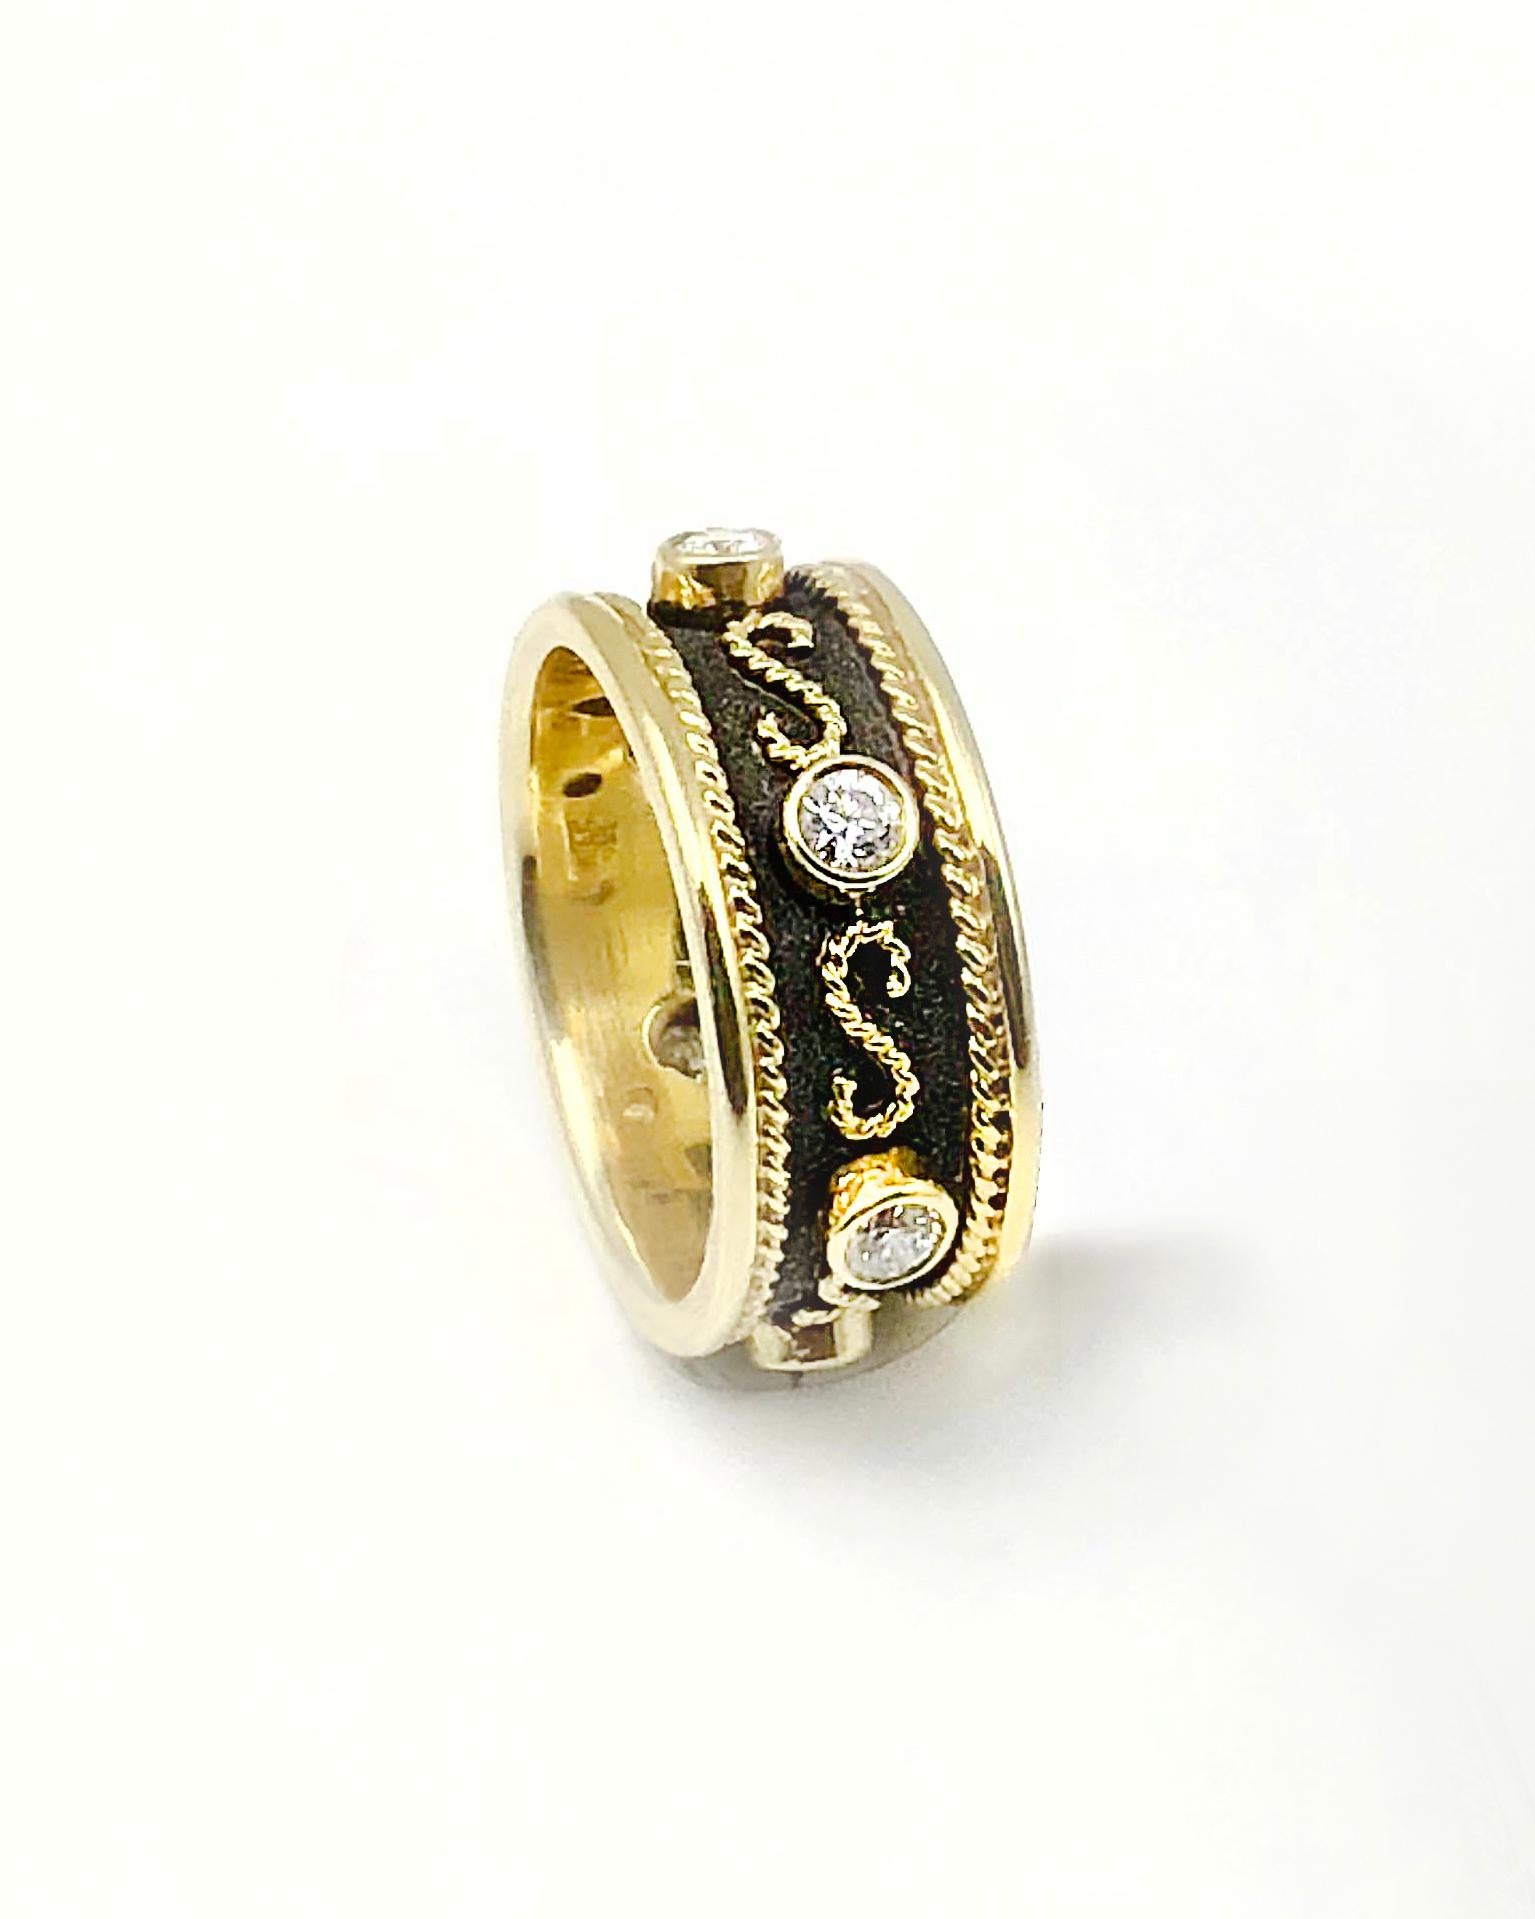 S.Georgios designer Eternity Band Ring is all handmade from solid 18 Karat Yellow Gold and custom-made. The beautiful ring is microscopically decorated all the way around with gold wires and granulated details contrast with Byzantine a unique velvet